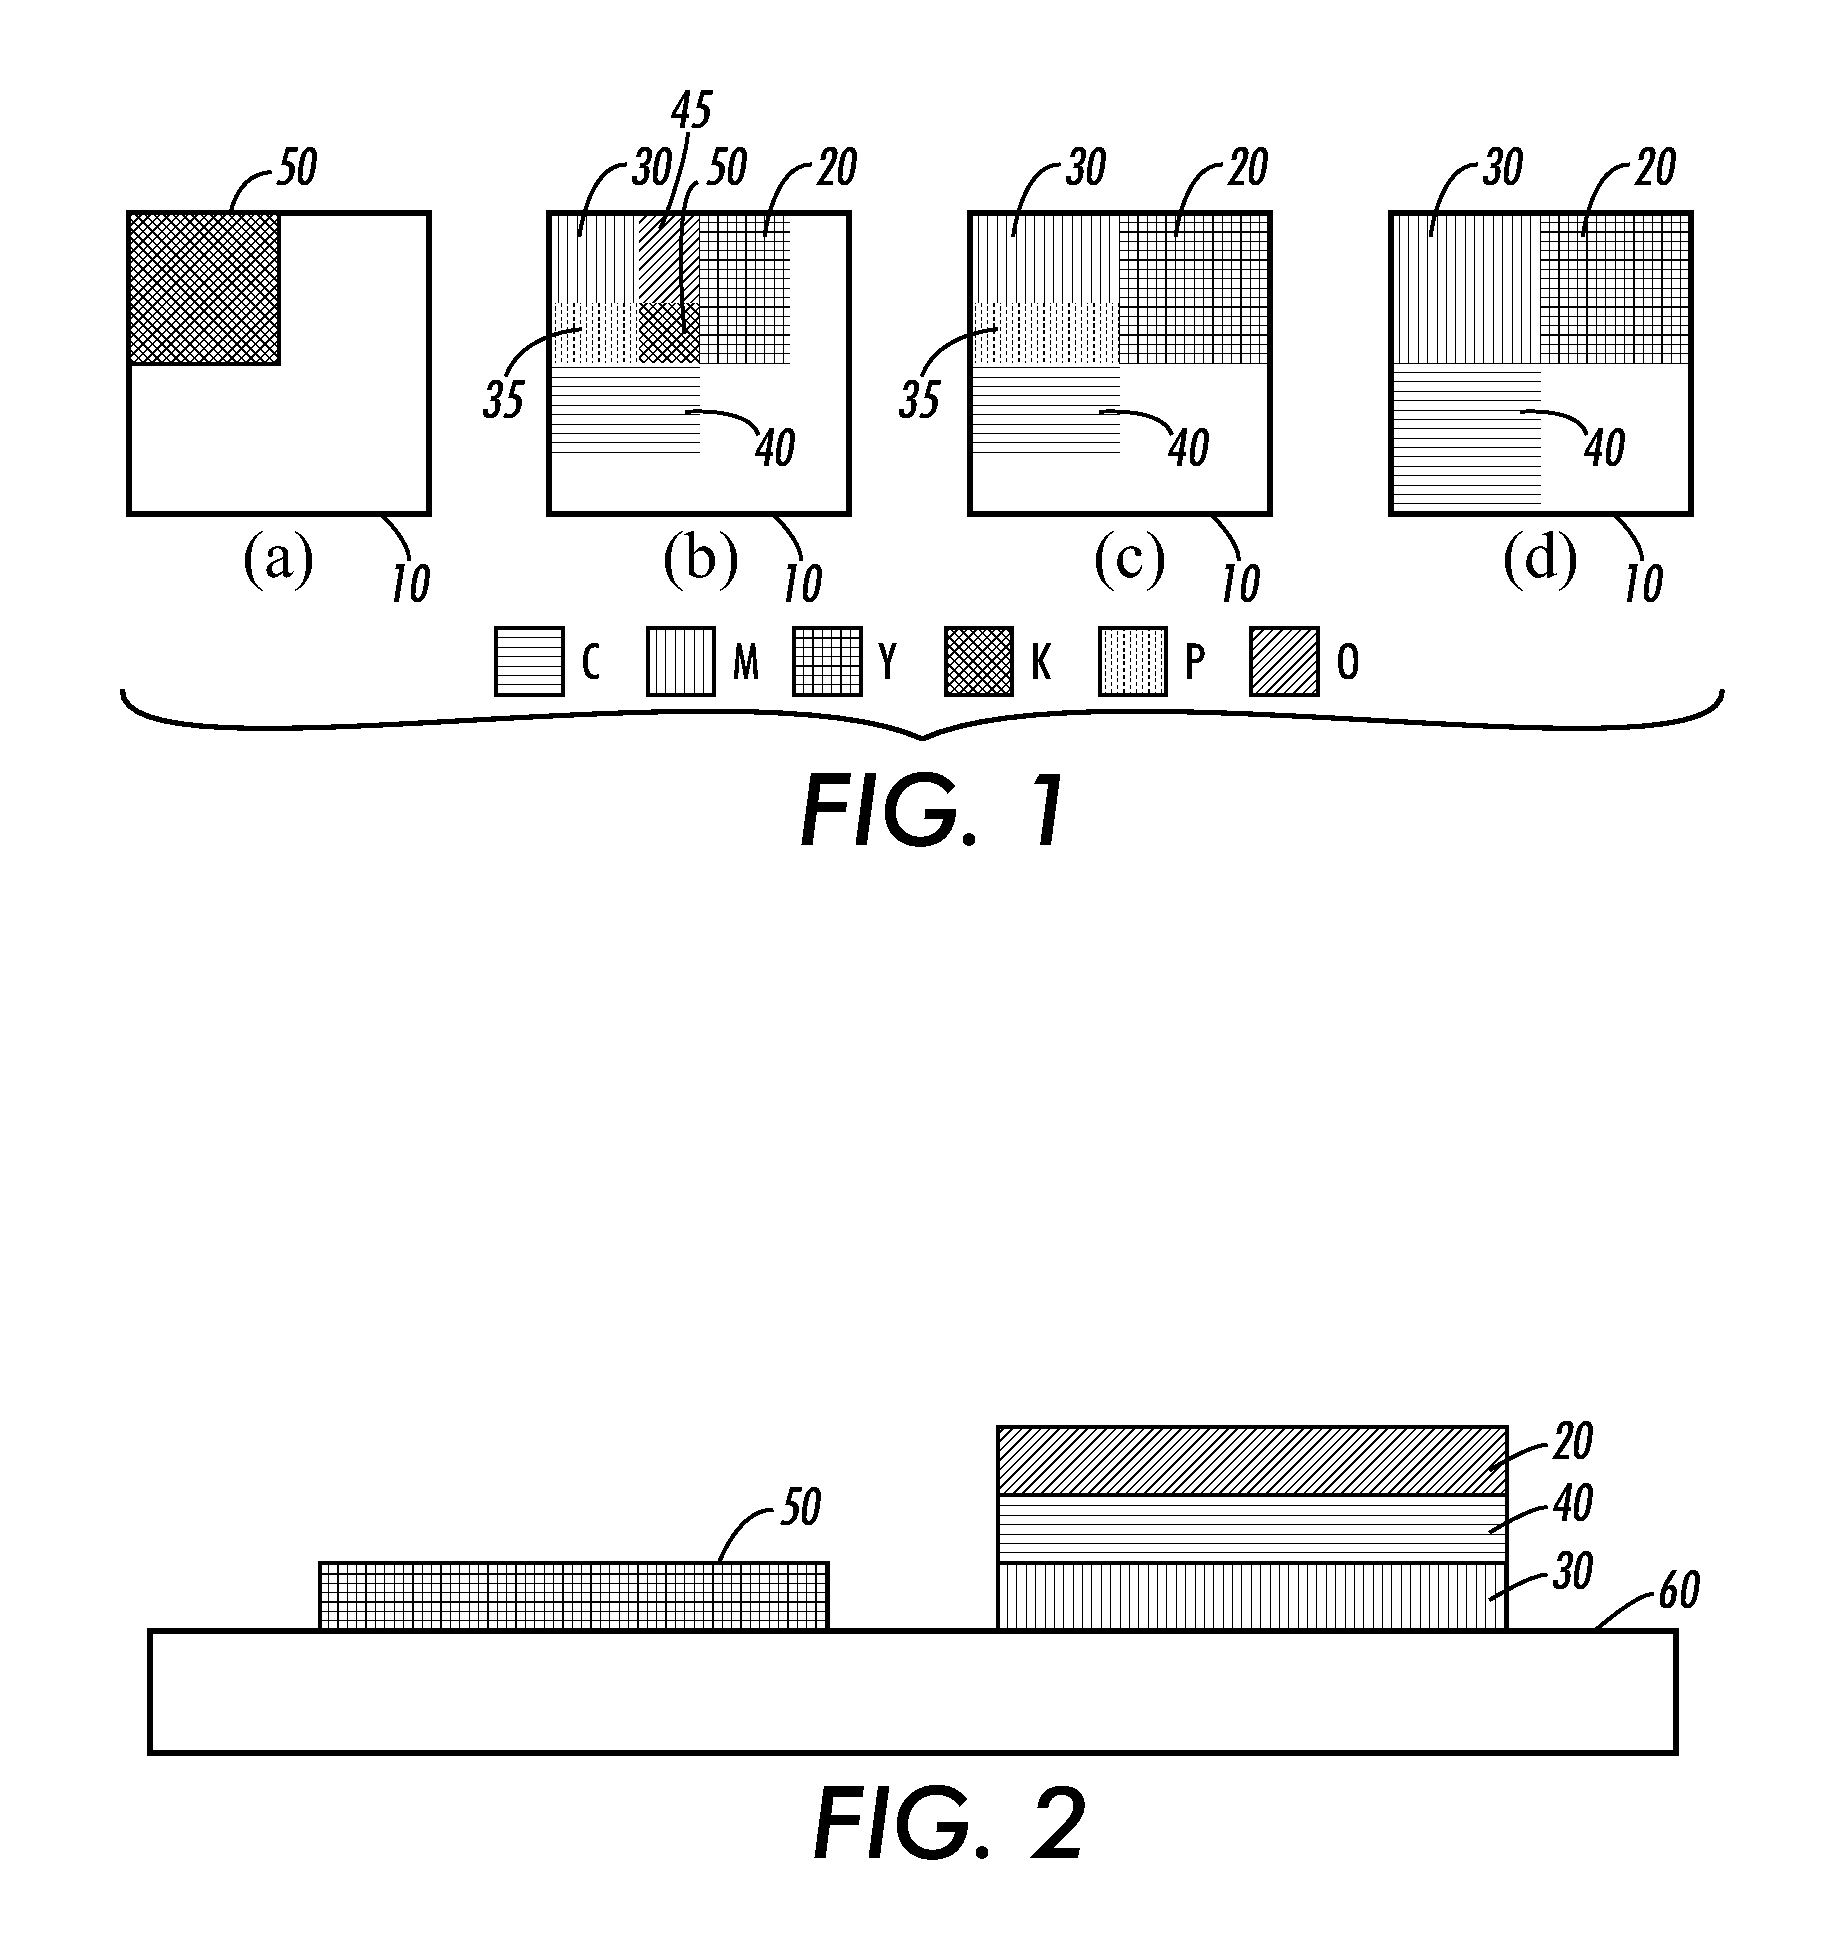 Infrared encoding of security elements using standard xerographic materials